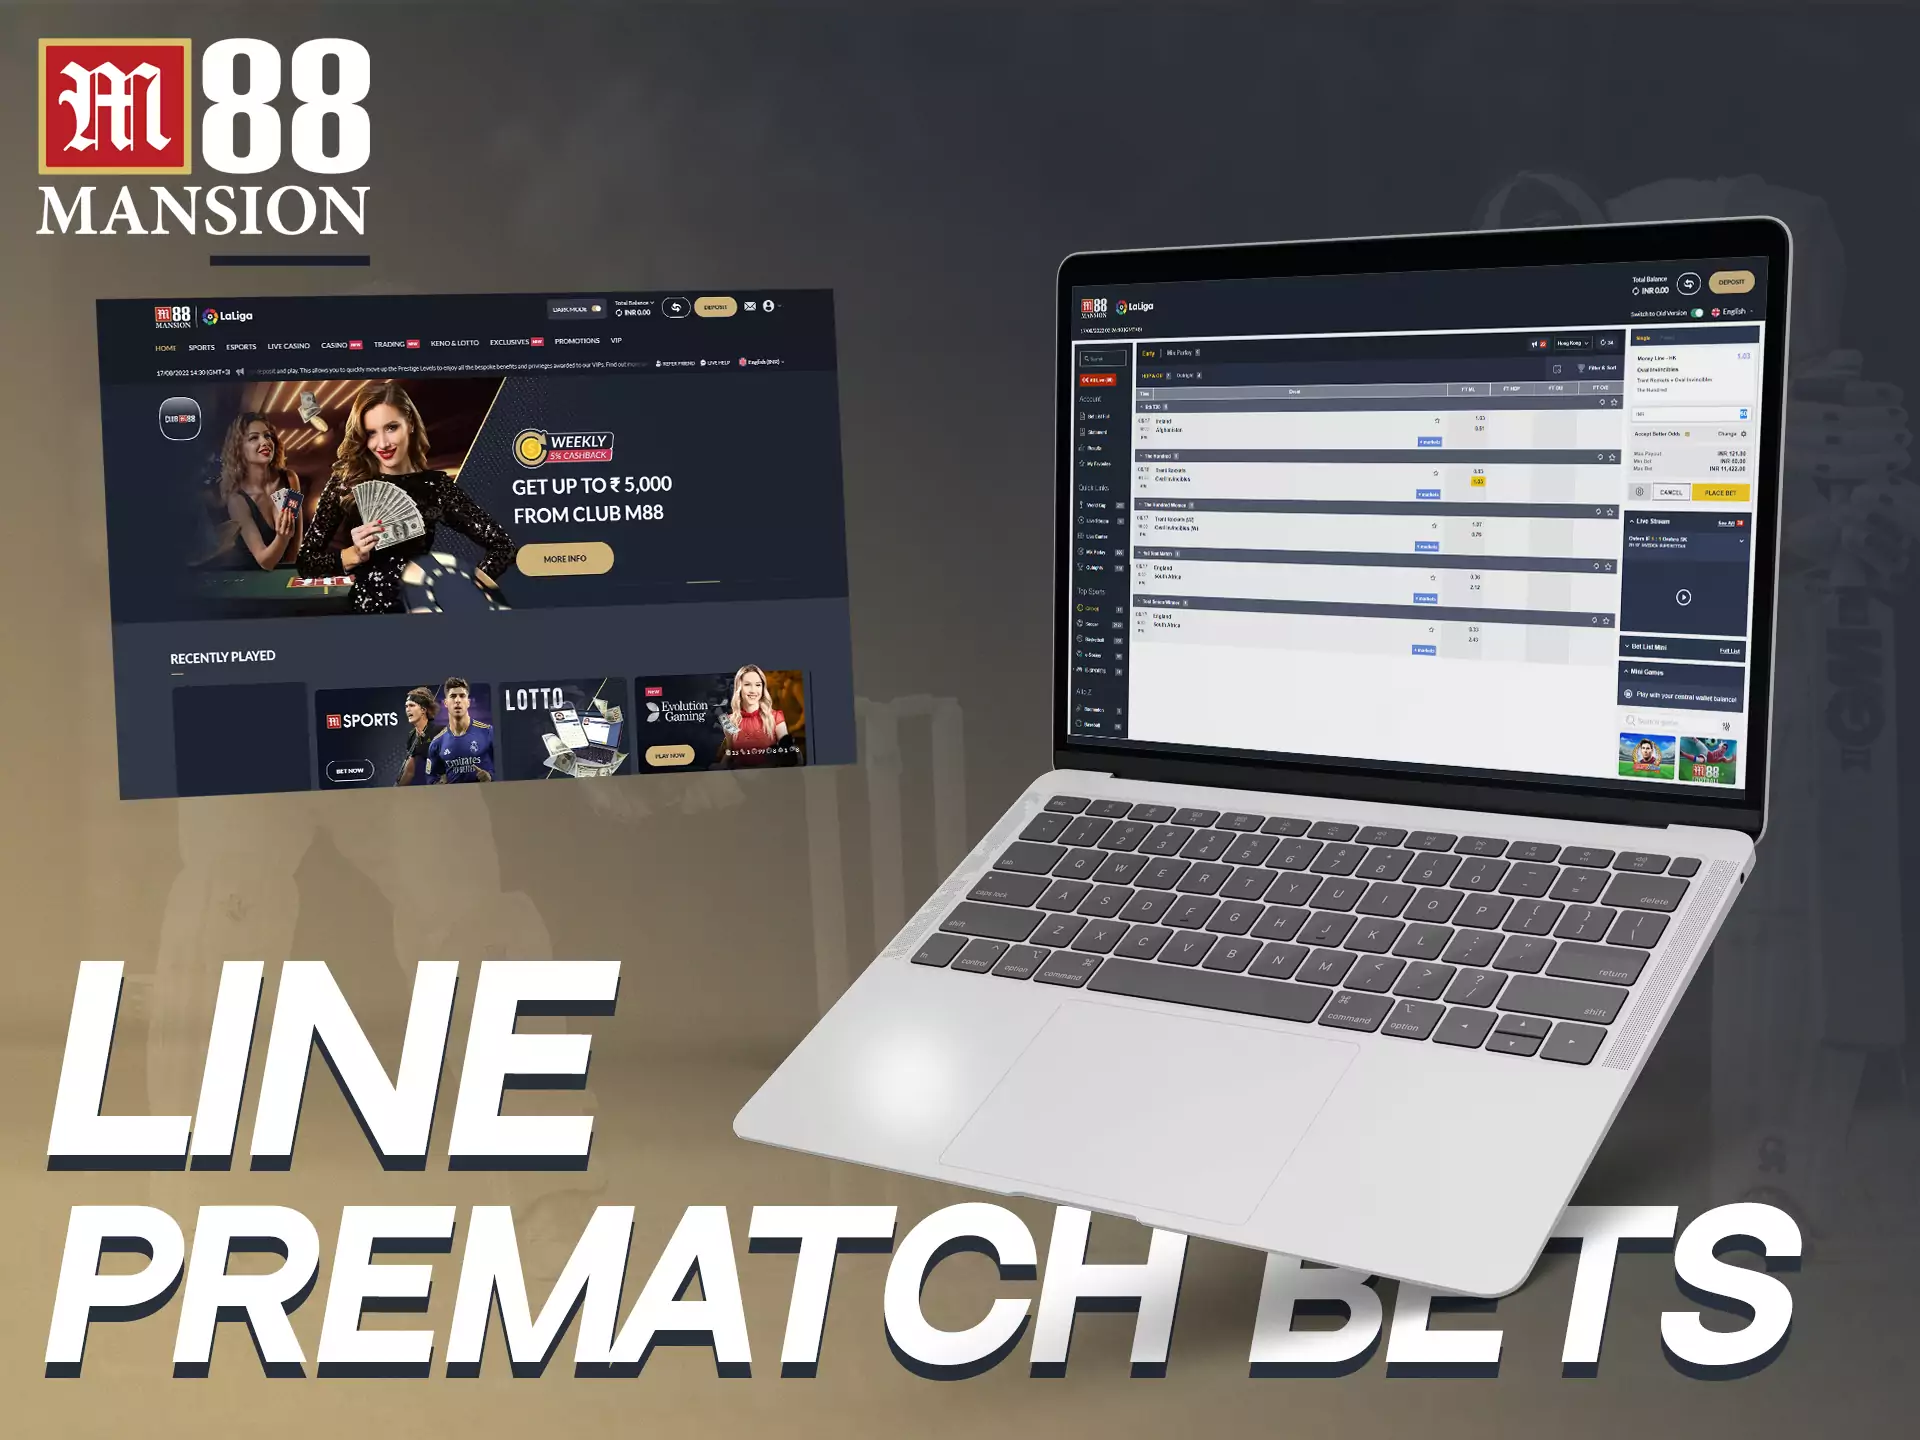 You can place a bet before a match in the line section on M88's sportsbook.